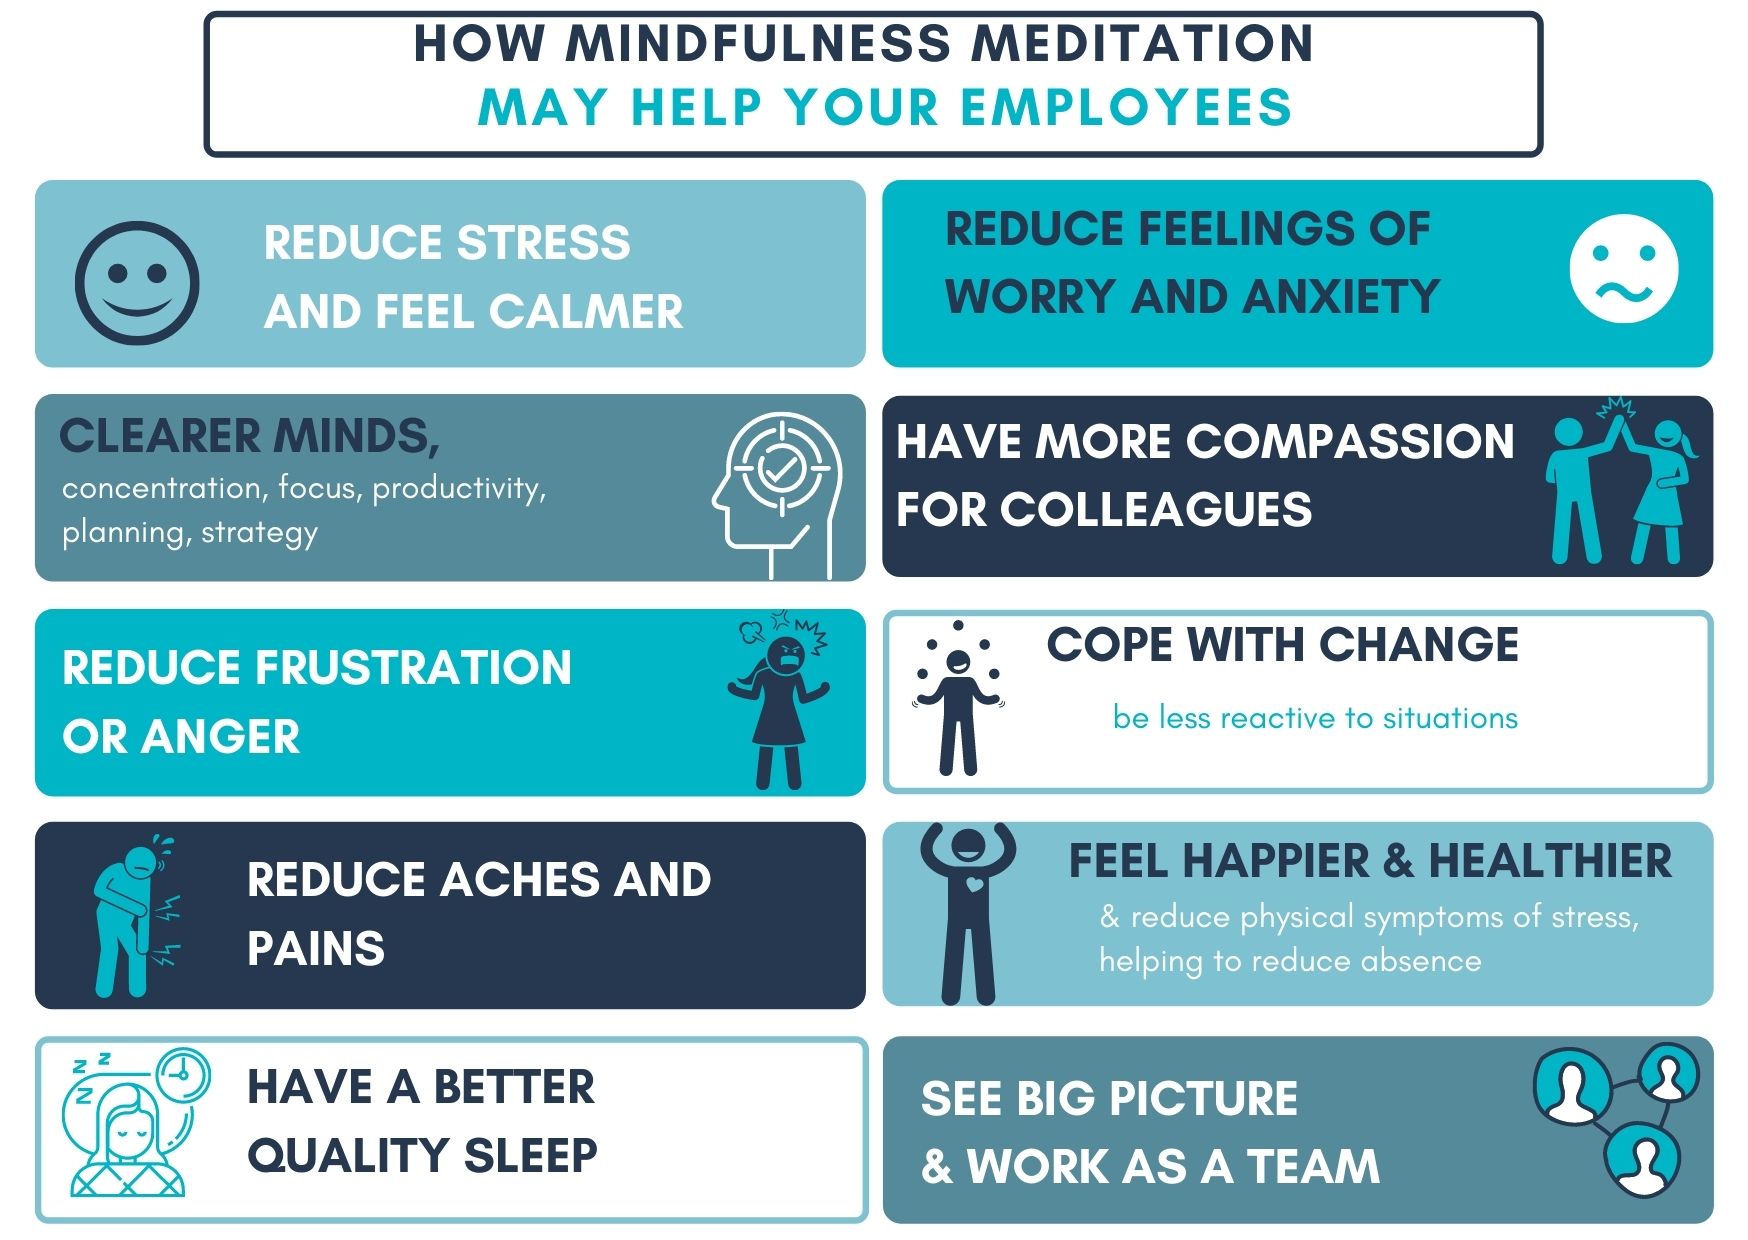 Mindfulness Meditation: Its Benefits In The Workplace